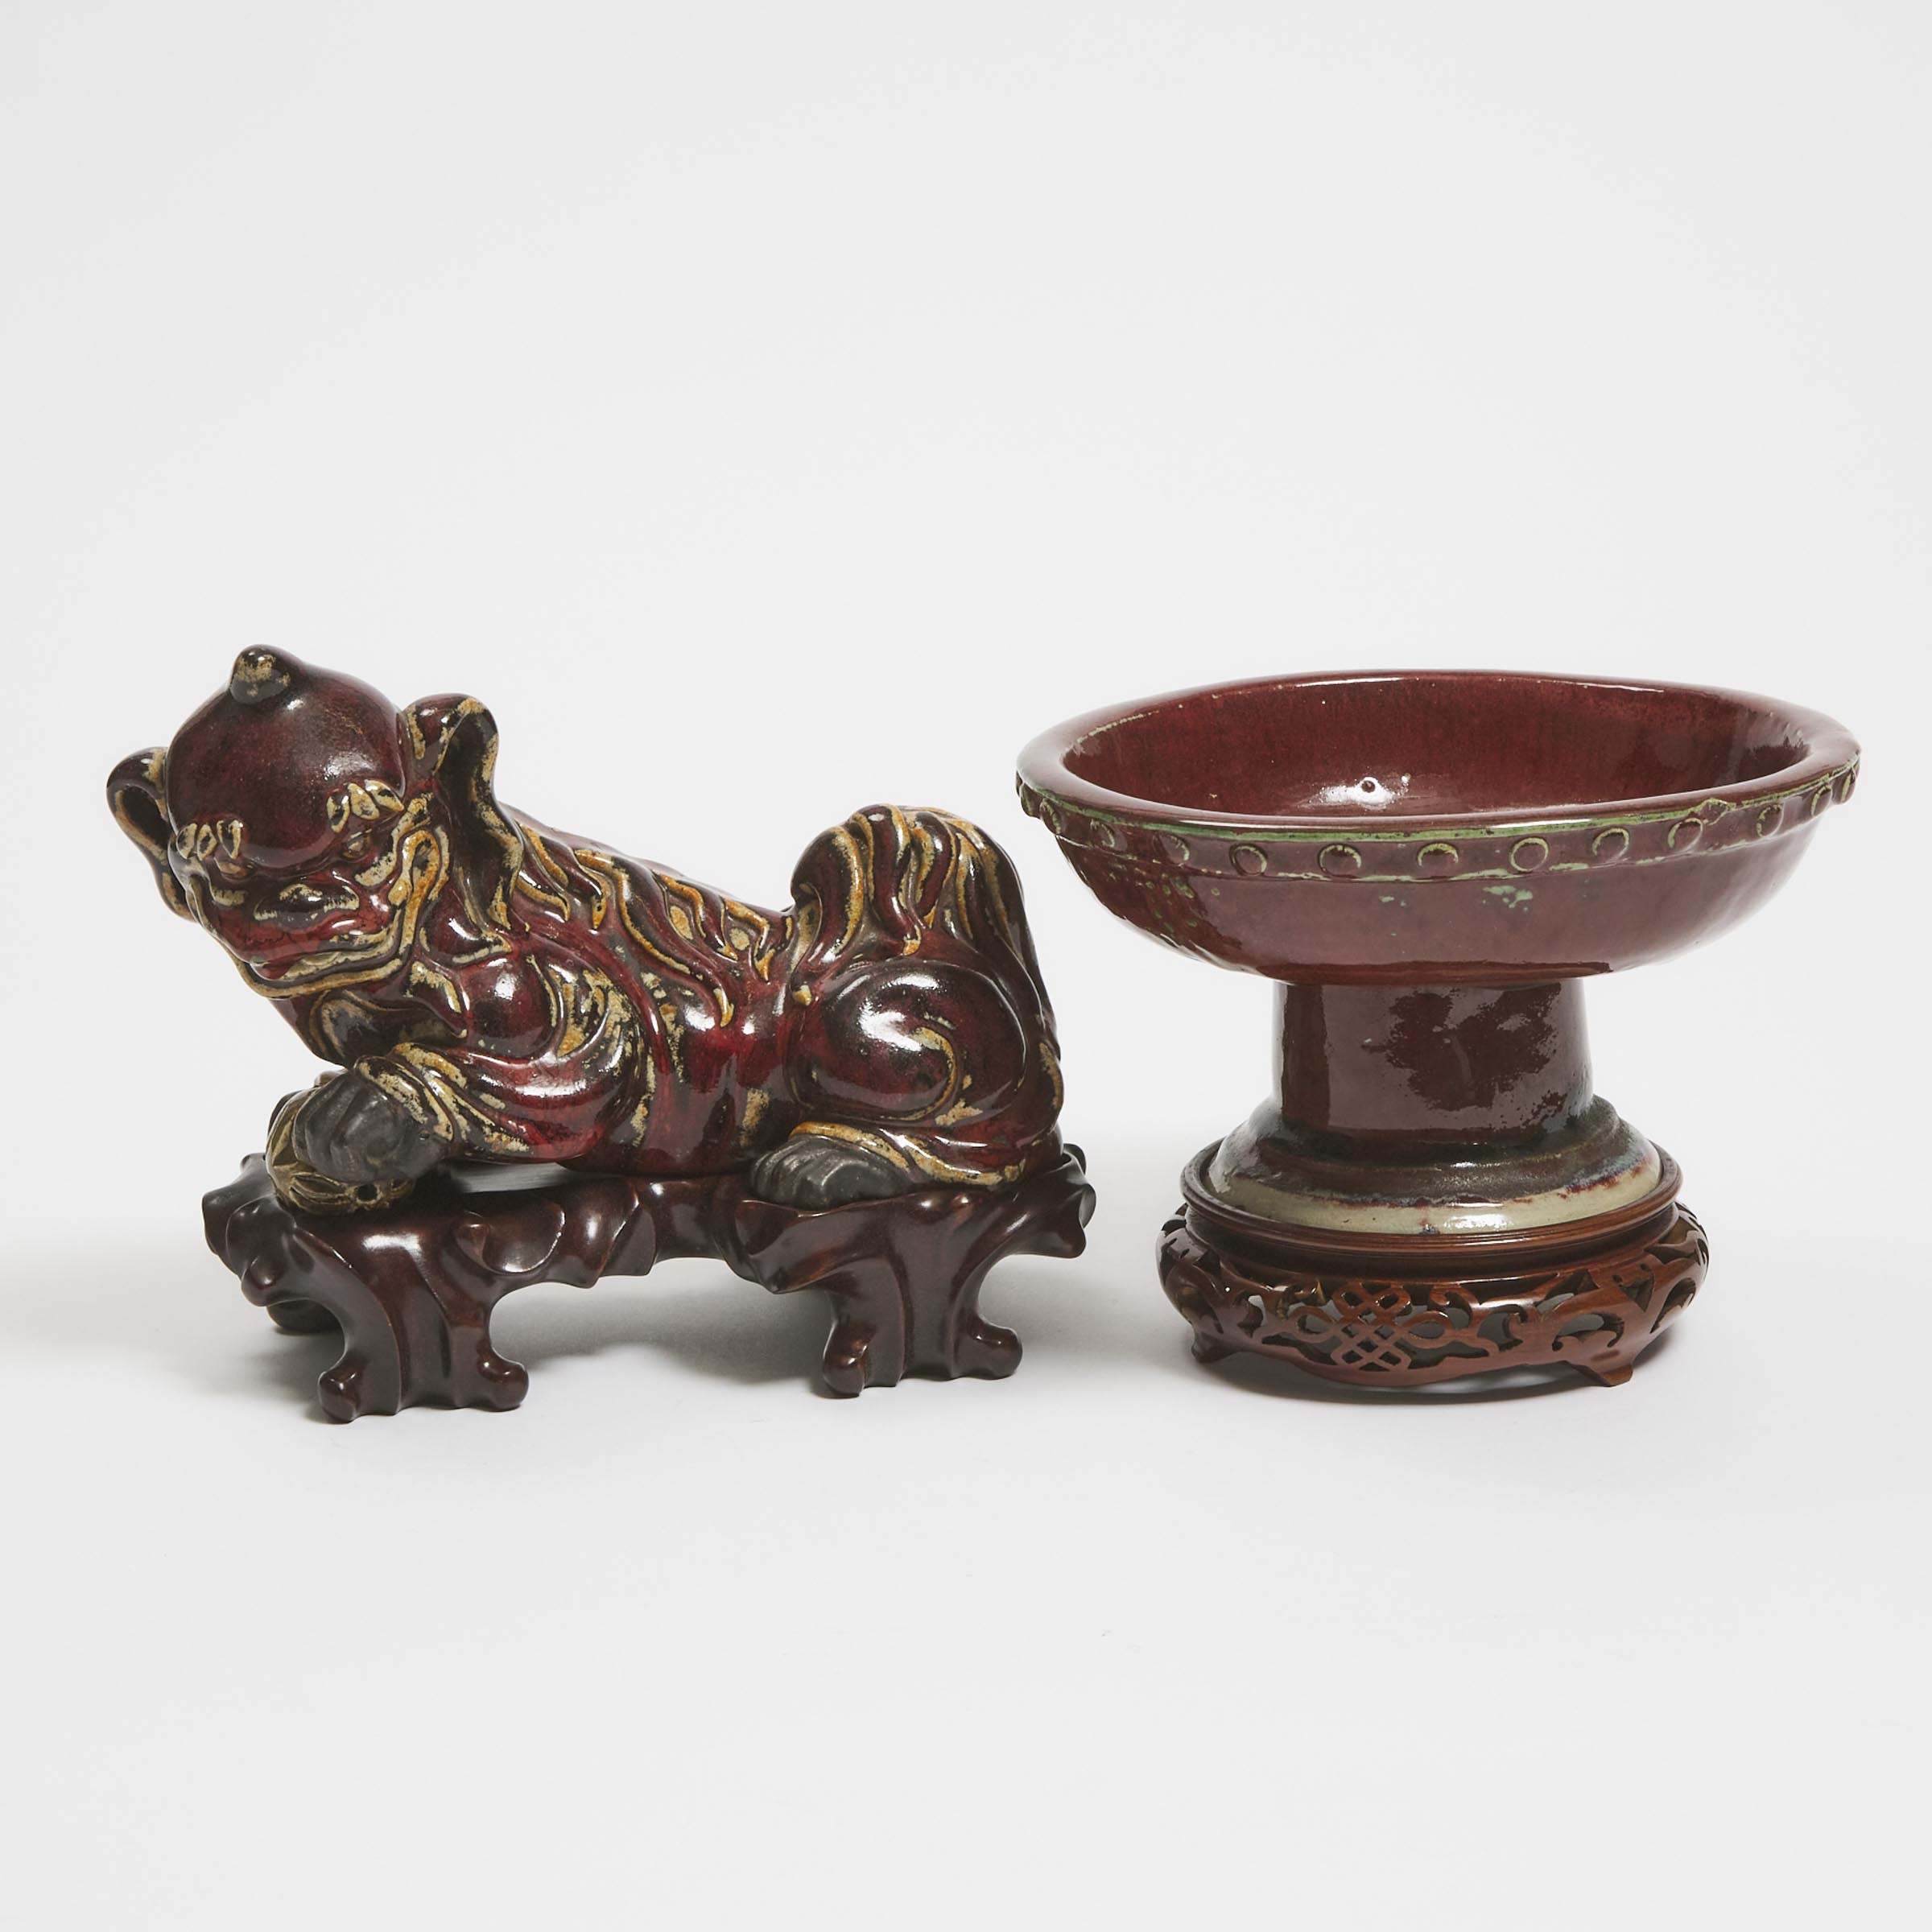 A Shiwan Red-Glazed Lion, Together With a Shiwan Flambé Footed Bowl, 19th/20th Century